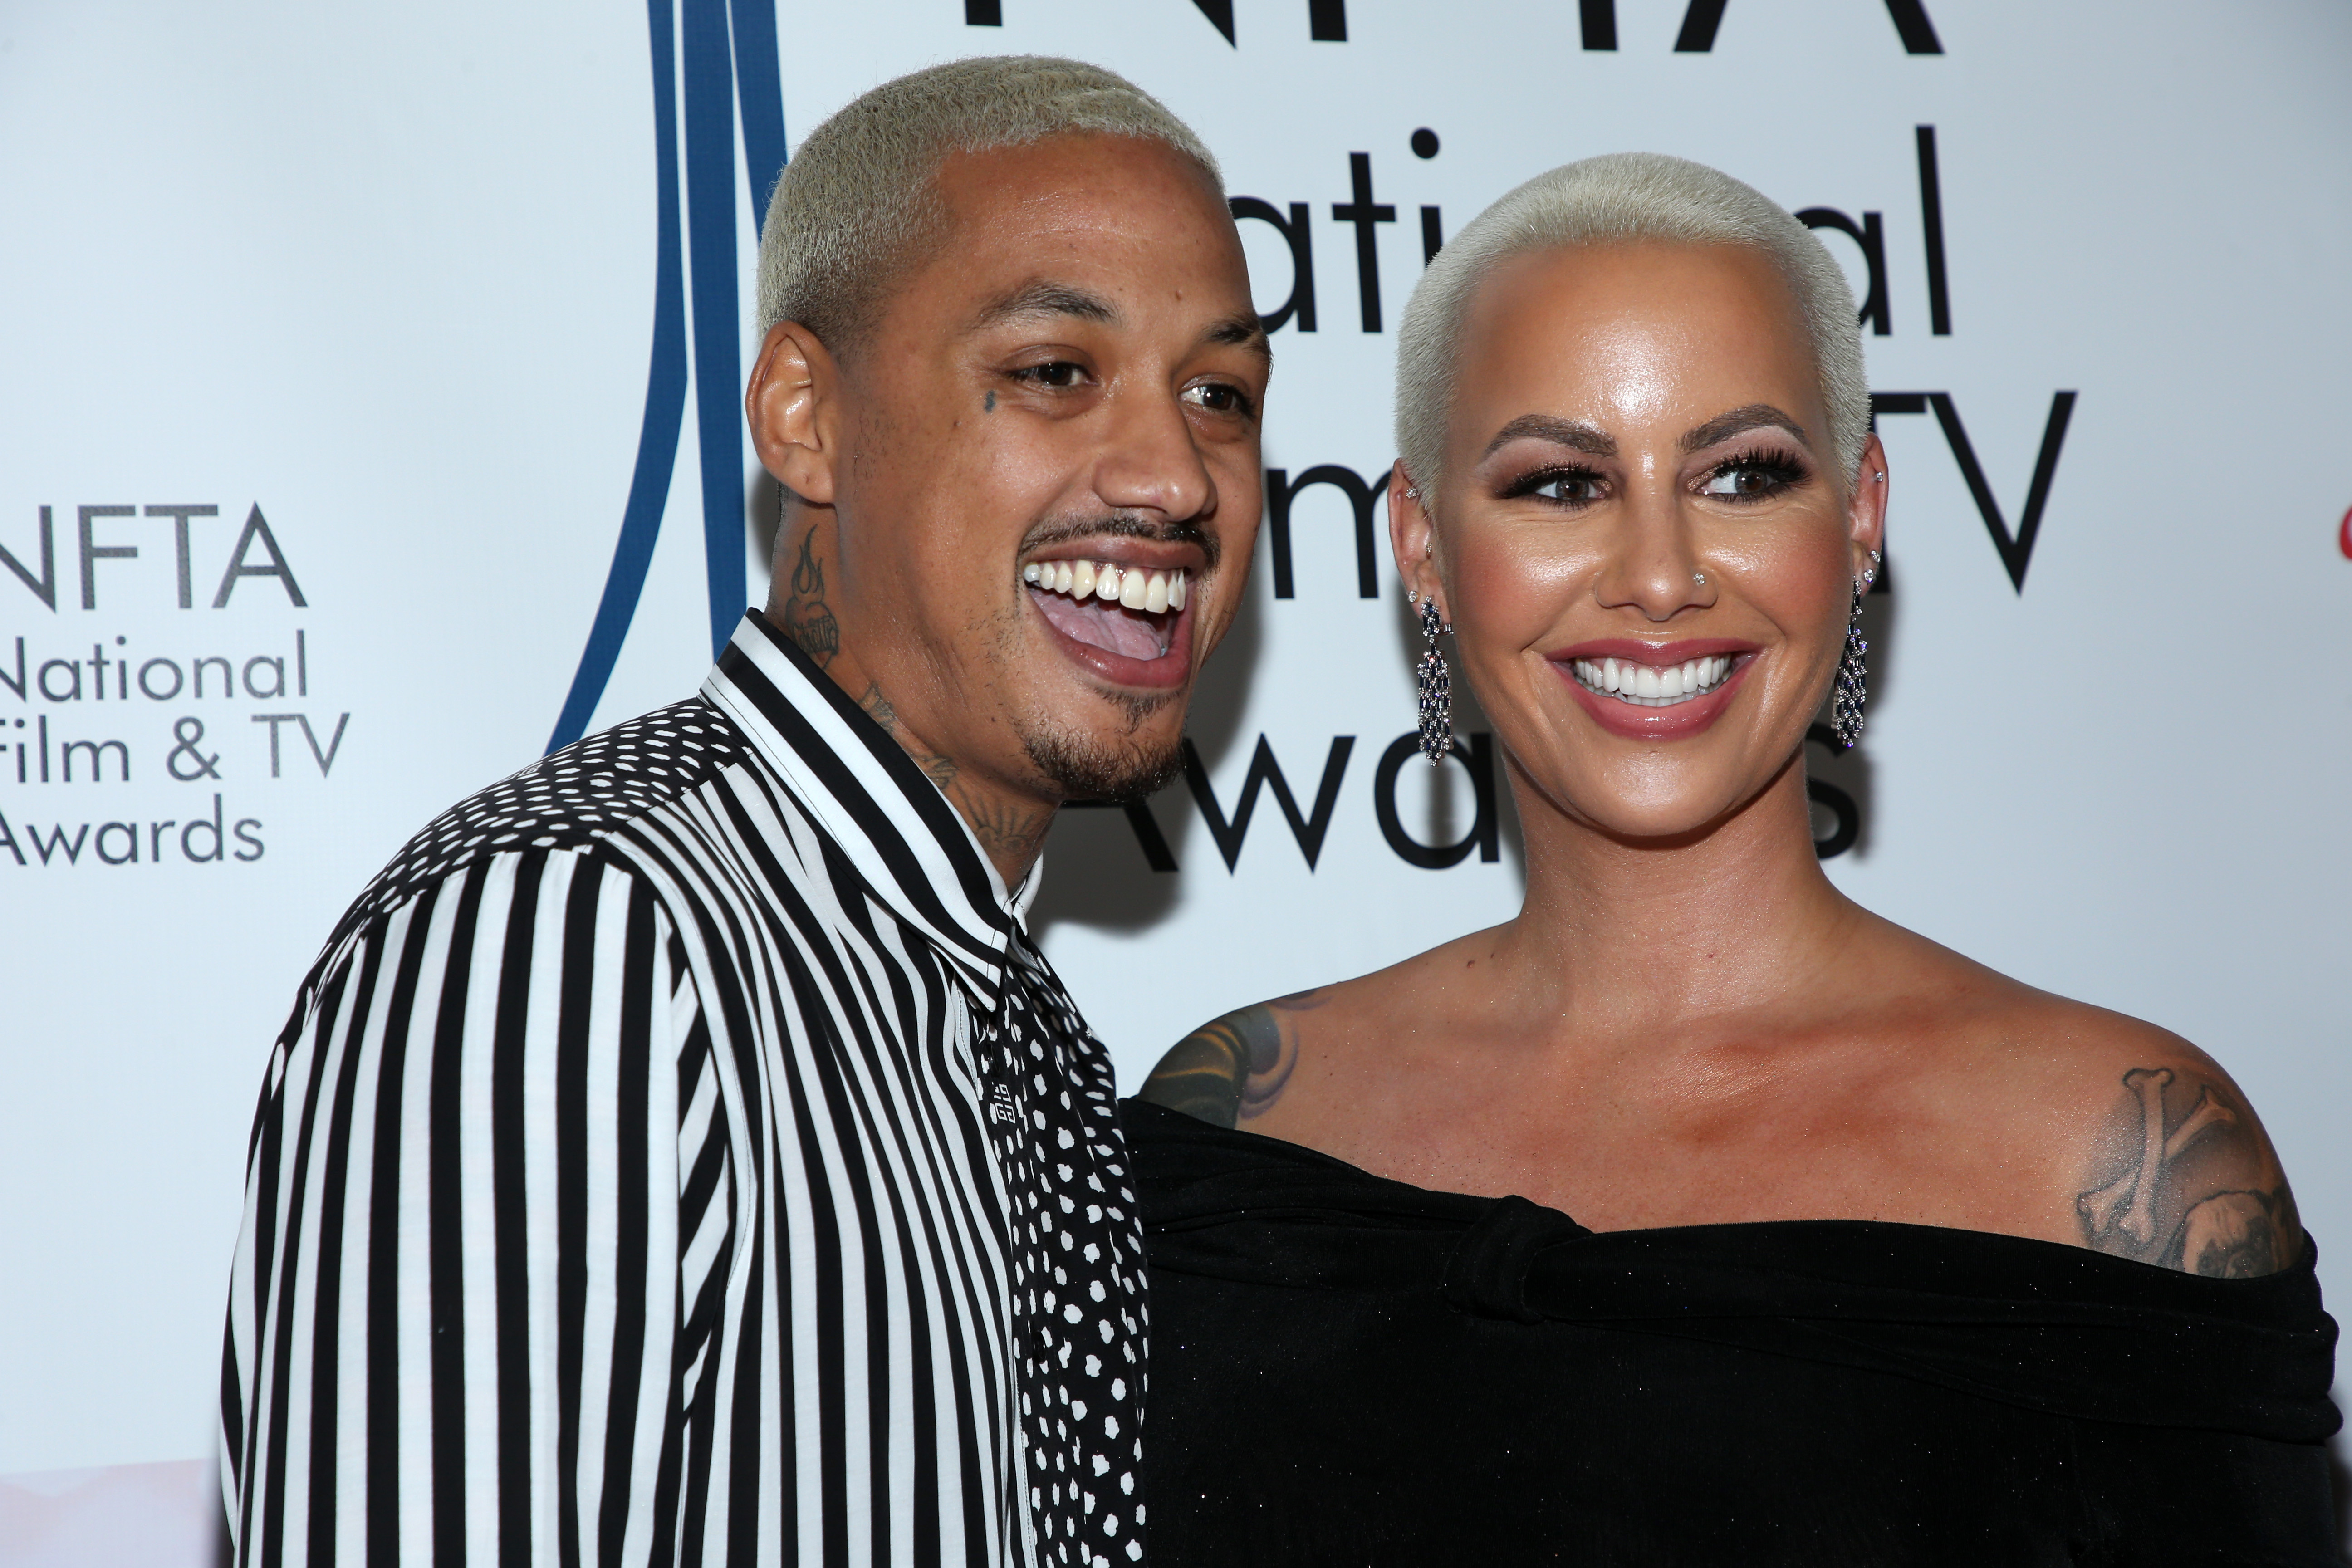 Amber rose name snapchat what is Amber Rose's